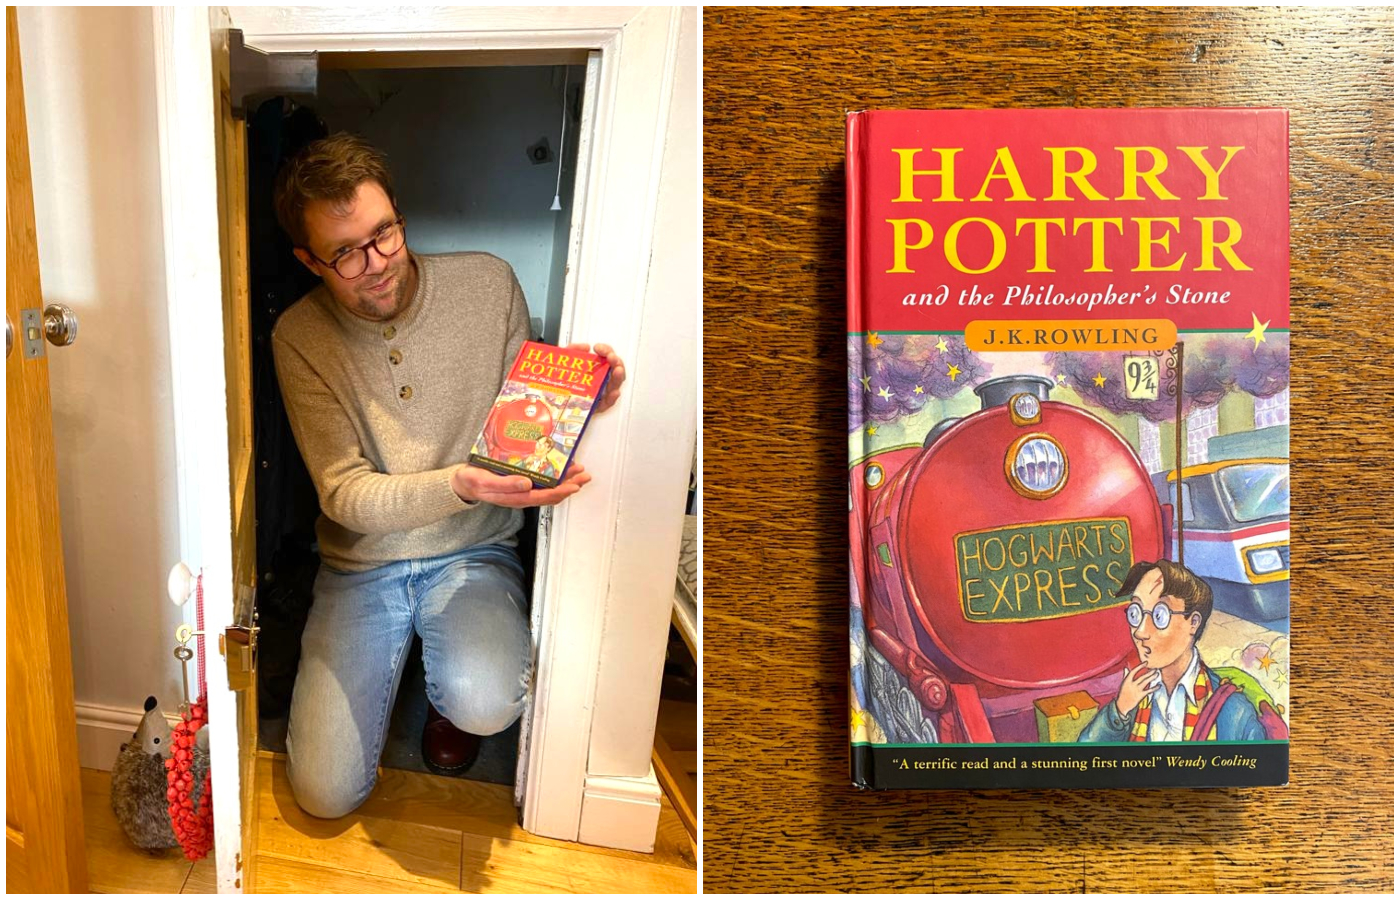 Harry Potter first edition sells for £60,000 - How to tell if you